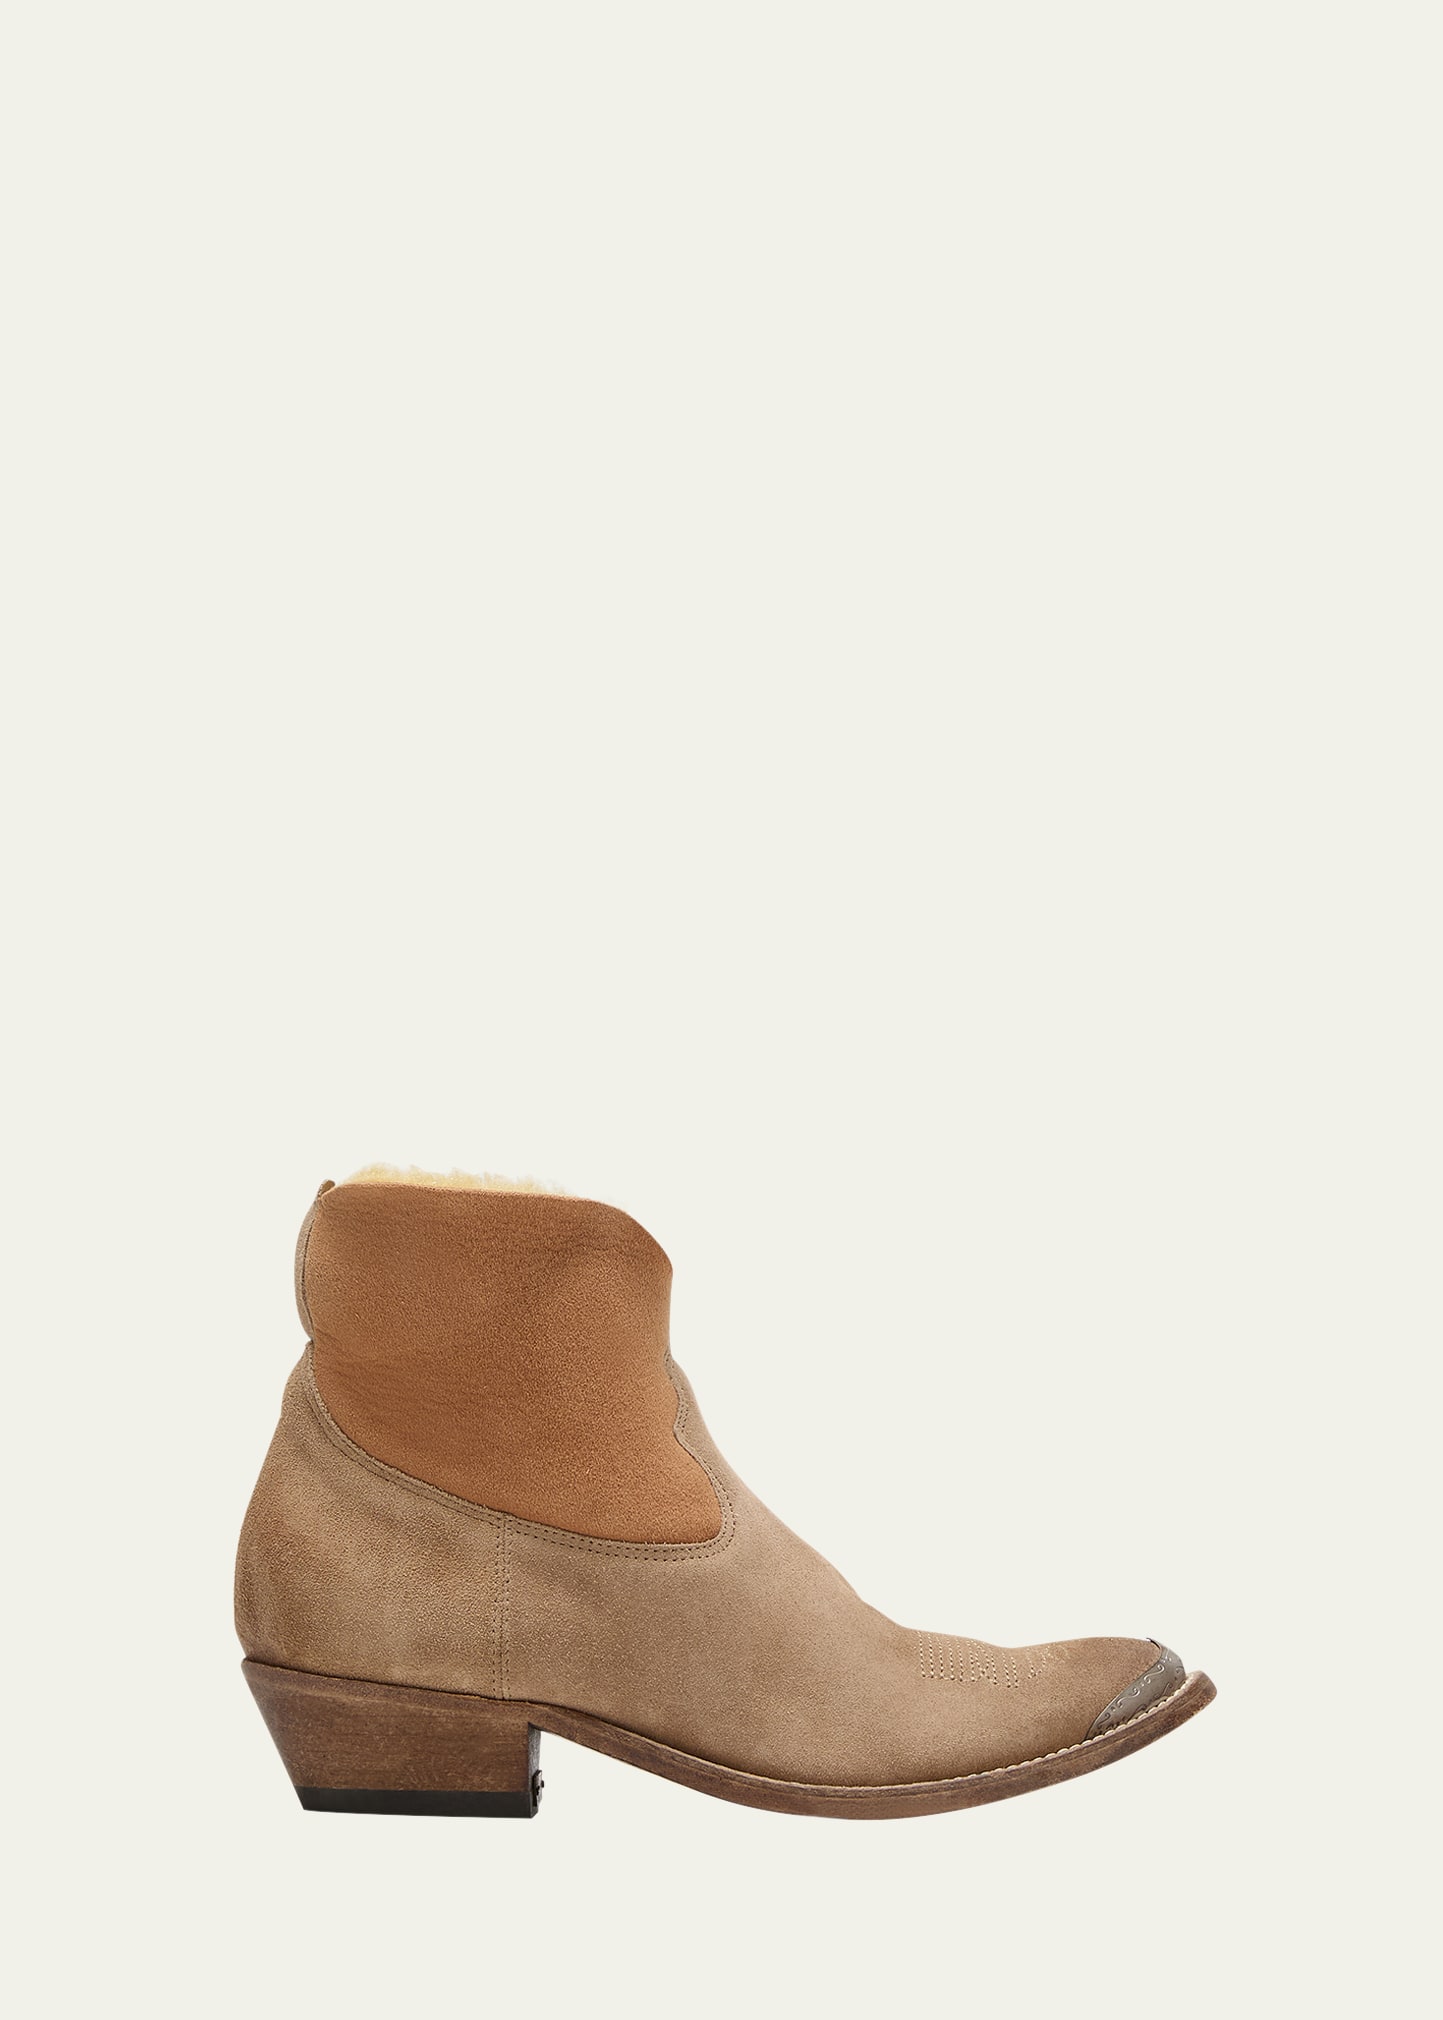 Golden Goose Young Cowboy Shearling-lined Boots In Tobacco/cream